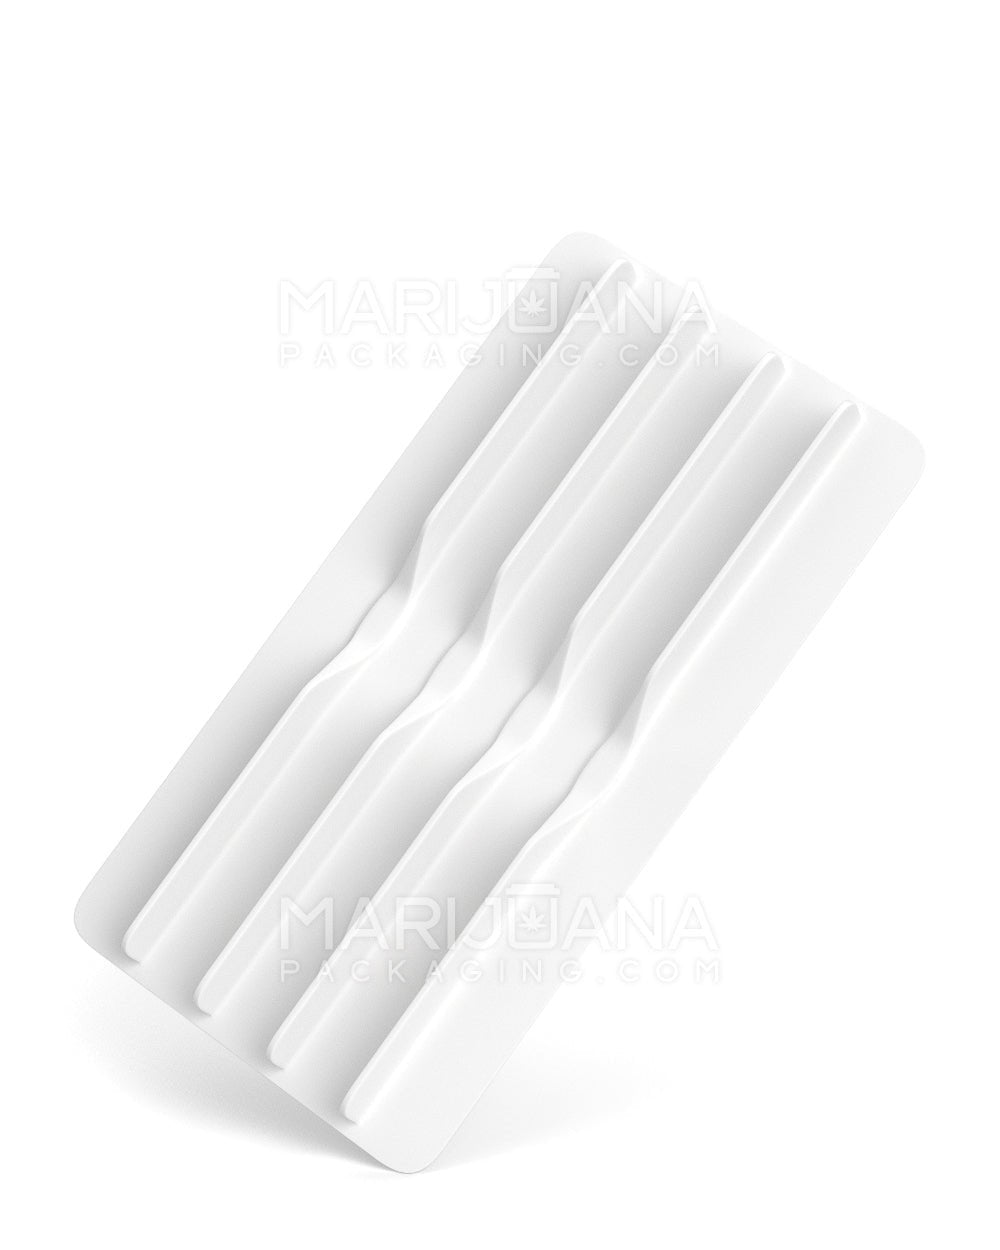 POLLEN GEAR | SnapTech Large White Plastic Insert Tray | 25mm - Foam - 2500 Count - 5